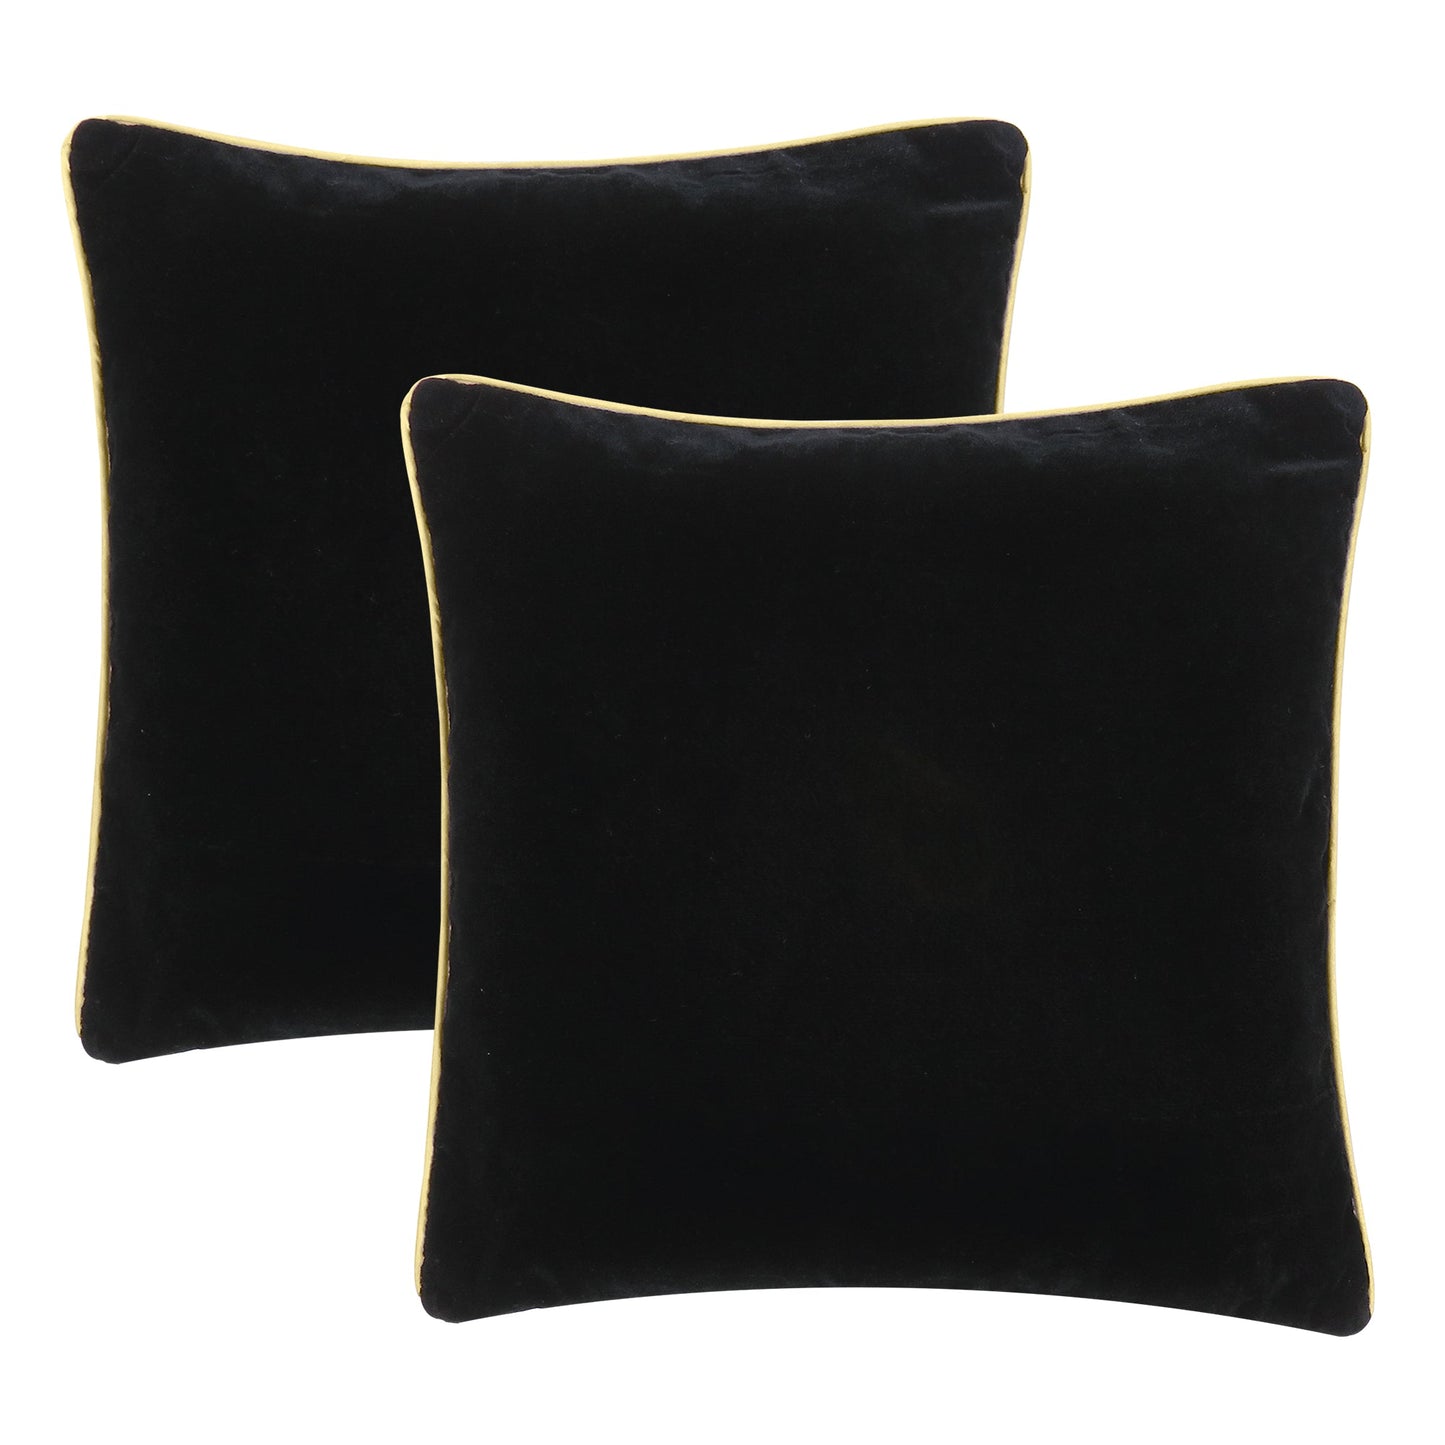 Black Velvet Cushion Cover with Gold Piping Edge in Set of 2